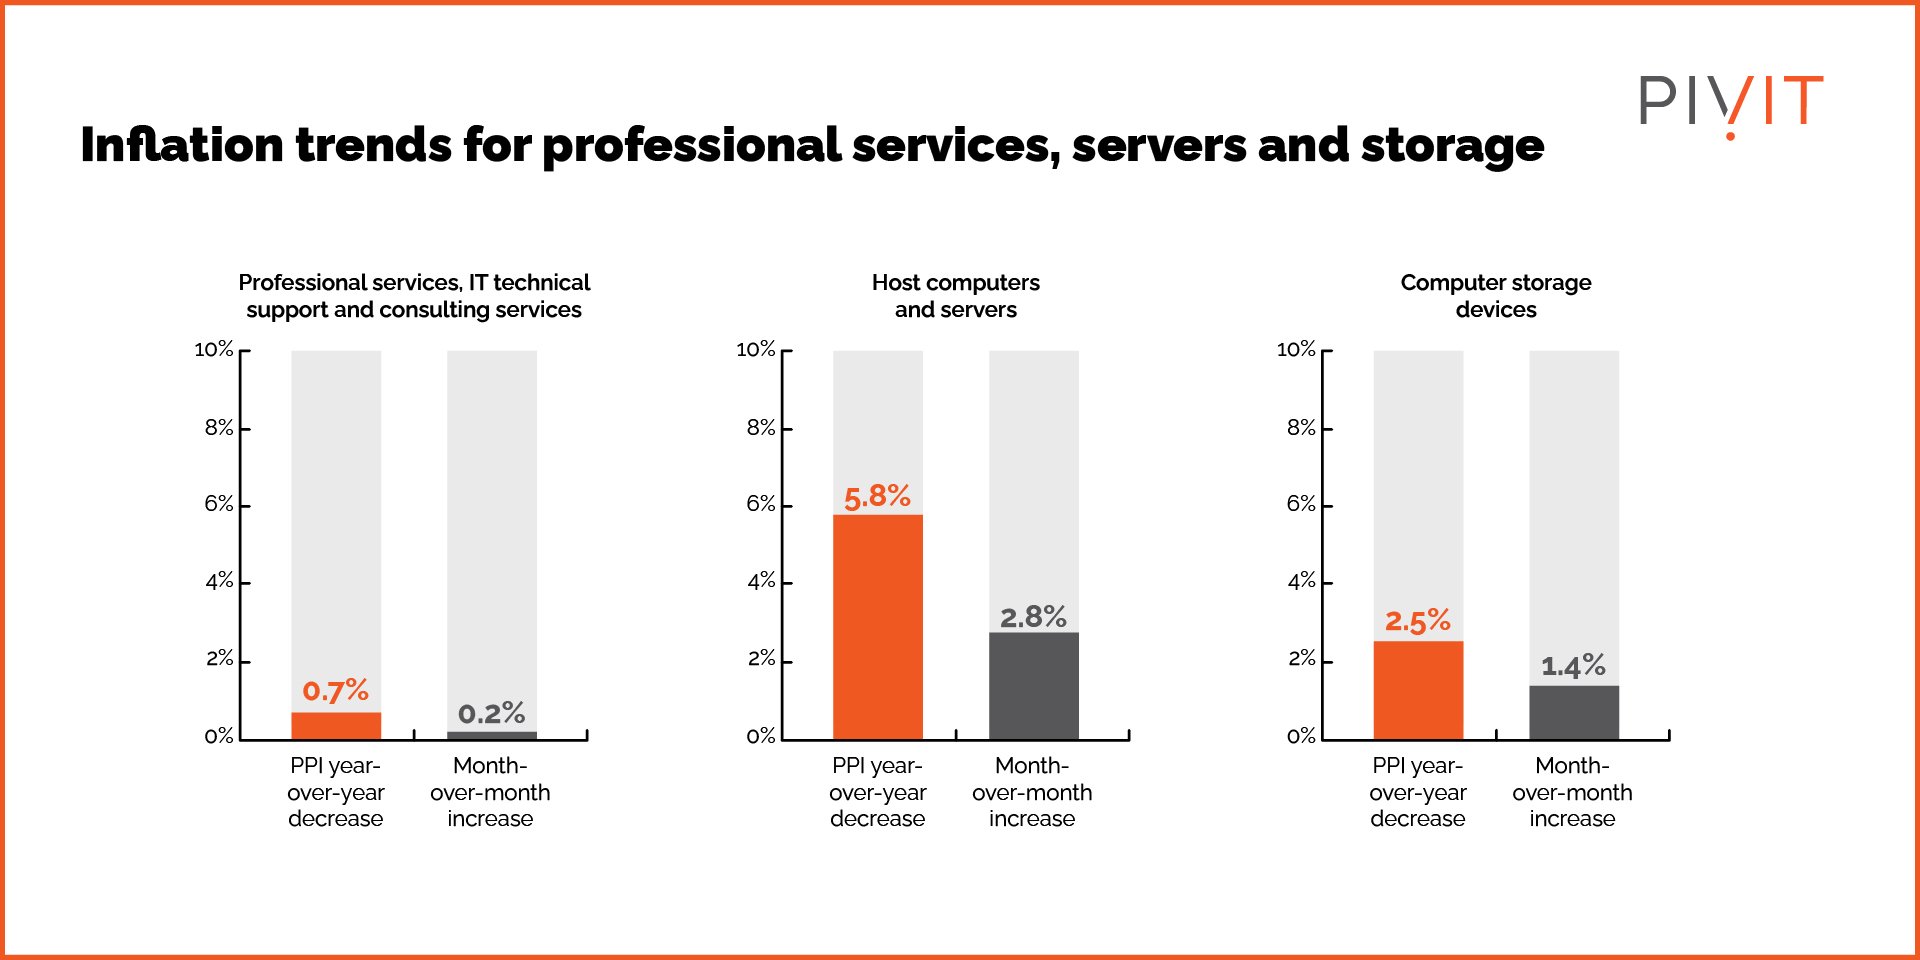 Inflation trends for professional services, server, and storage